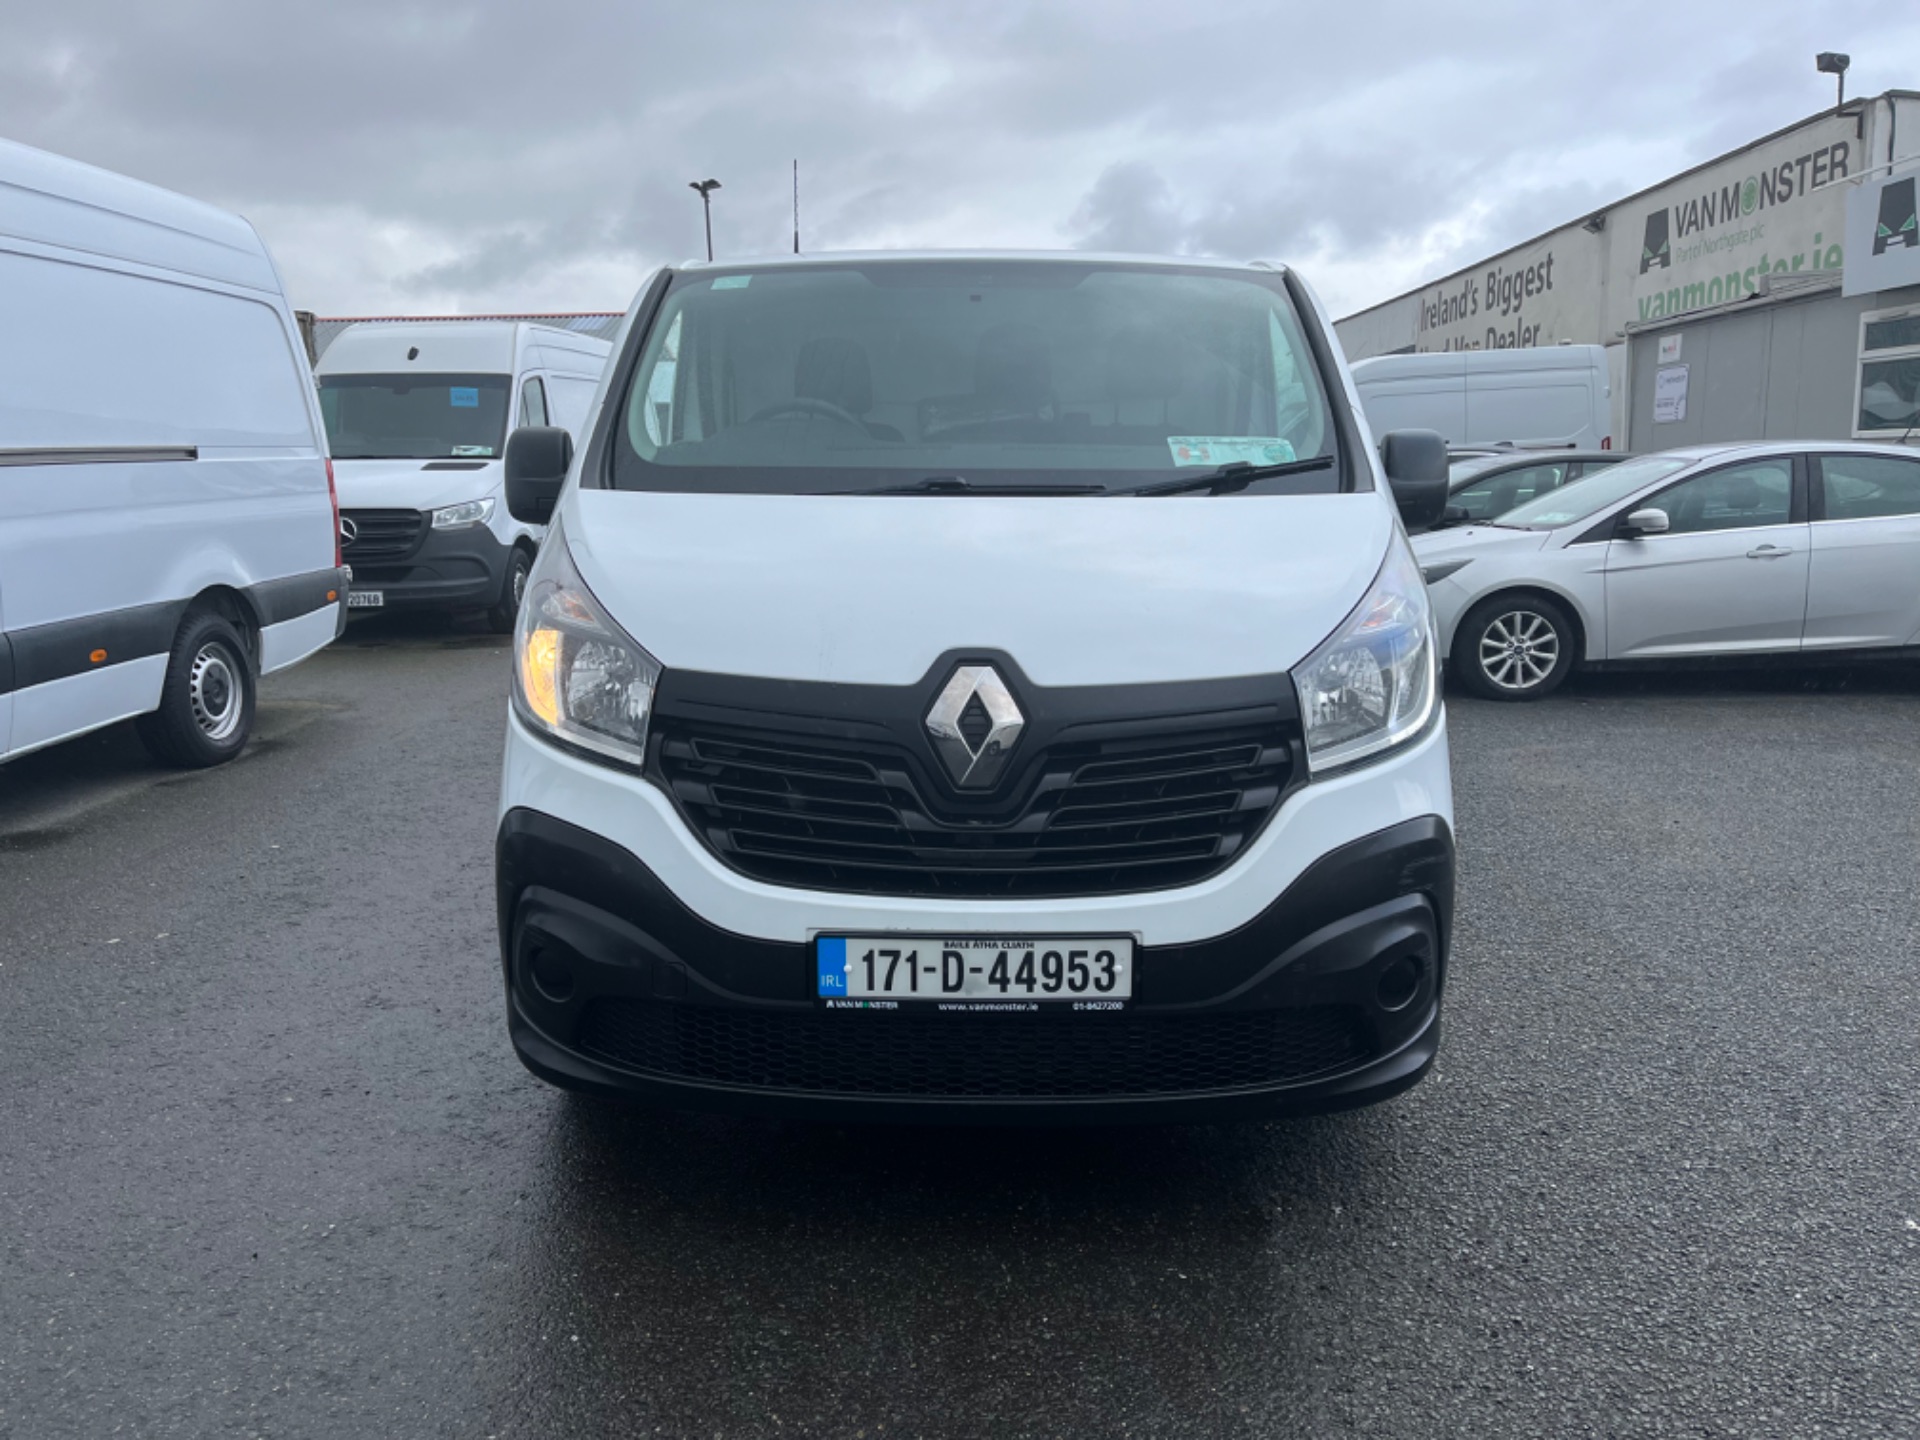 2017 Renault Trafic LL29 DCI 120 Business 3DR (171D44953) Image 2